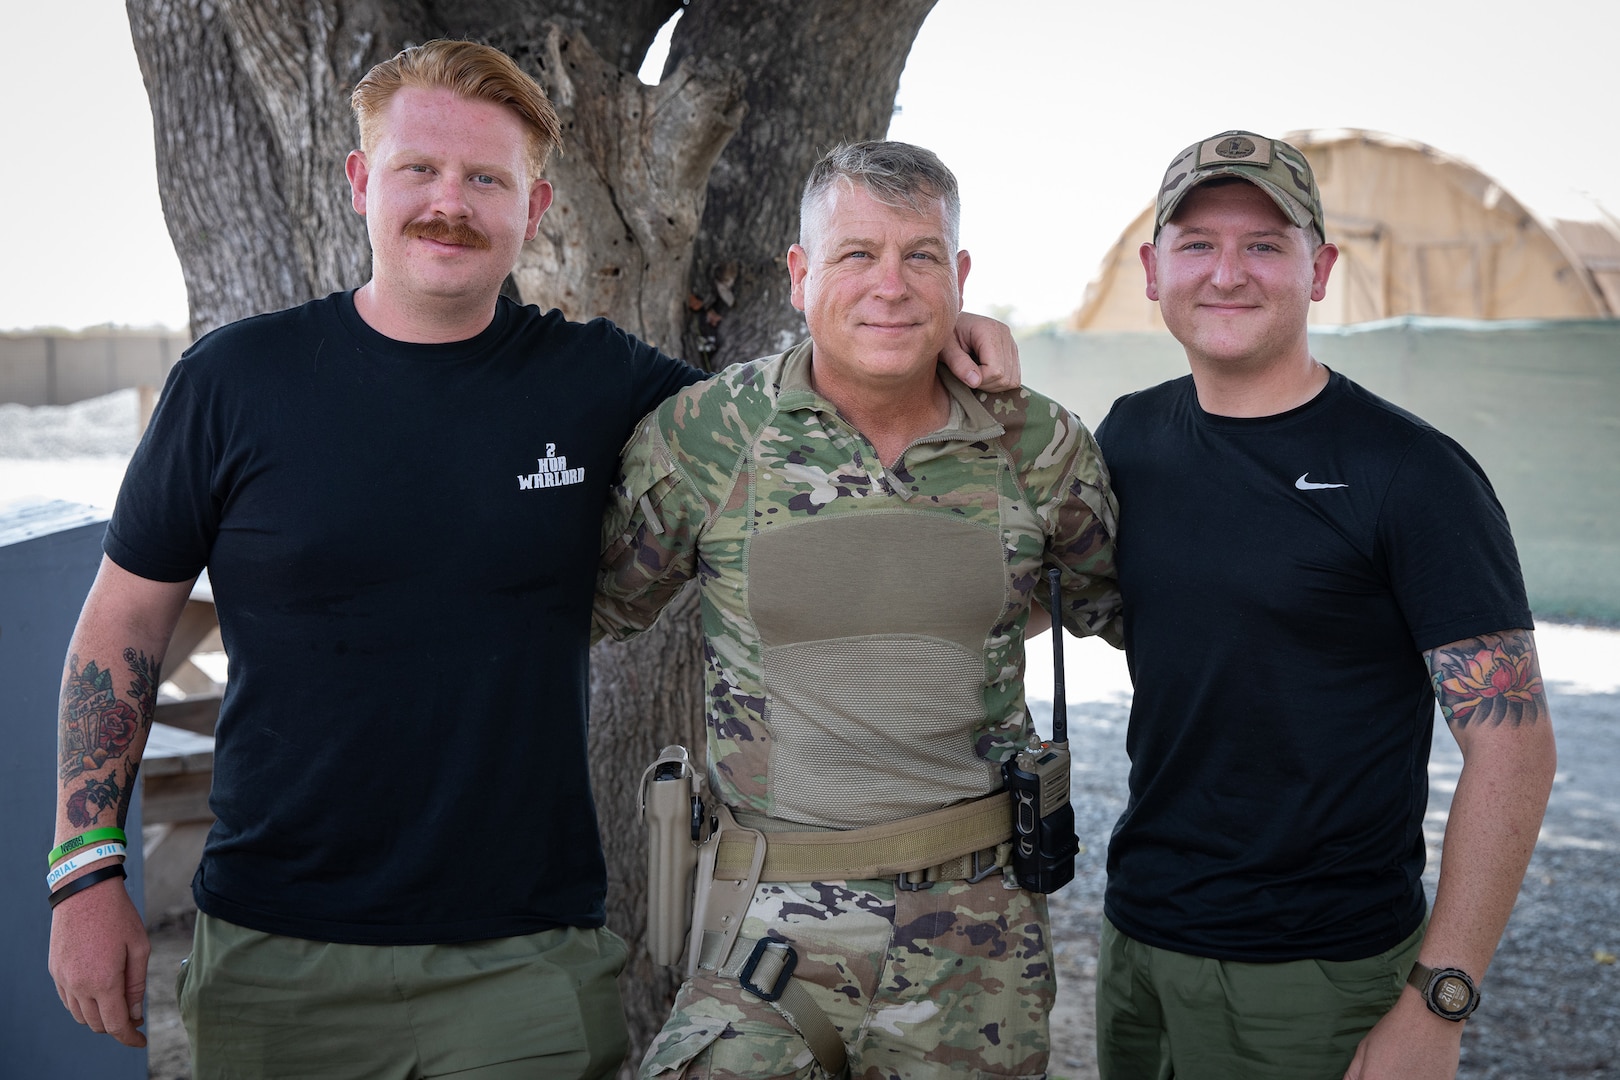 Staff Sgt. Daniel Fisher with his sons, Spcs. Caleb and Jacob Fisher. The three are all deployed with the Virginia Army National Guard’s Task Force Red Dragon, assigned to Combined Joint Task Force-Horn of Africa.